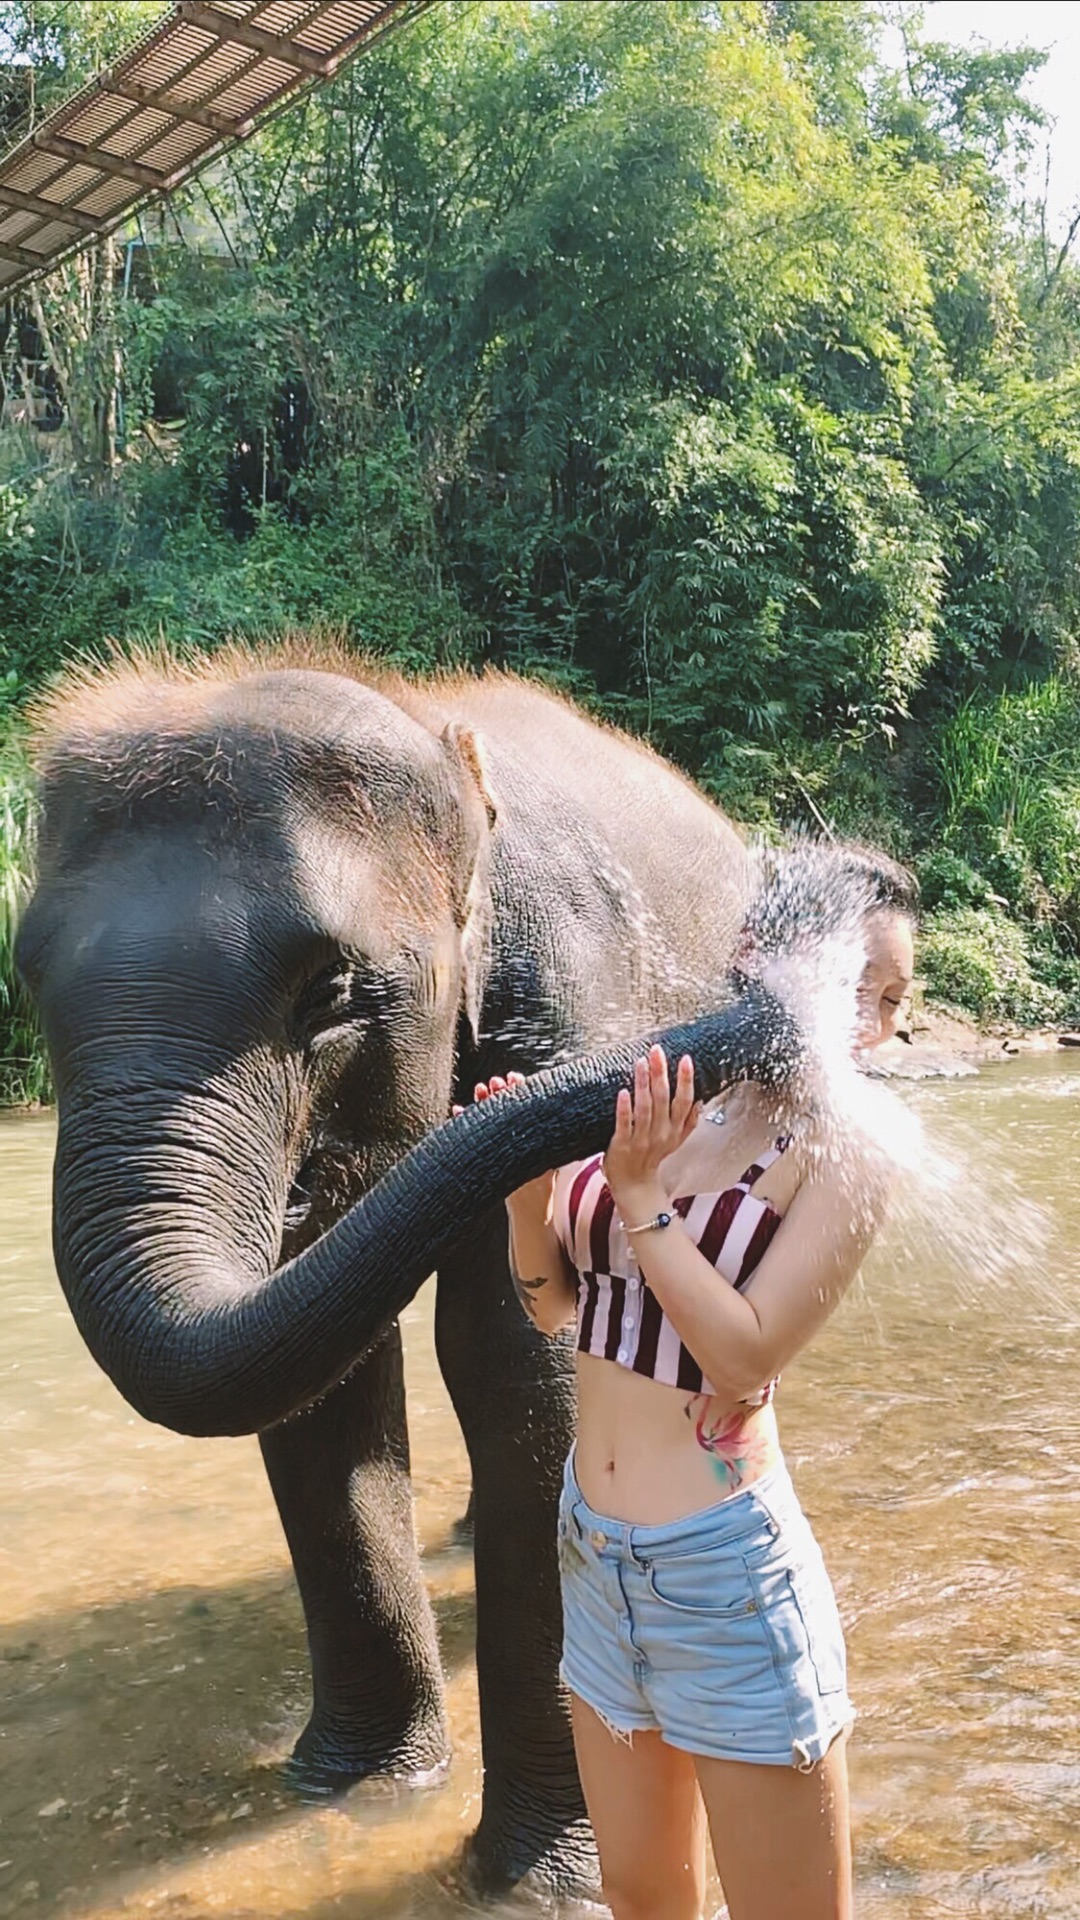 The happiness of being awakened by an elephant